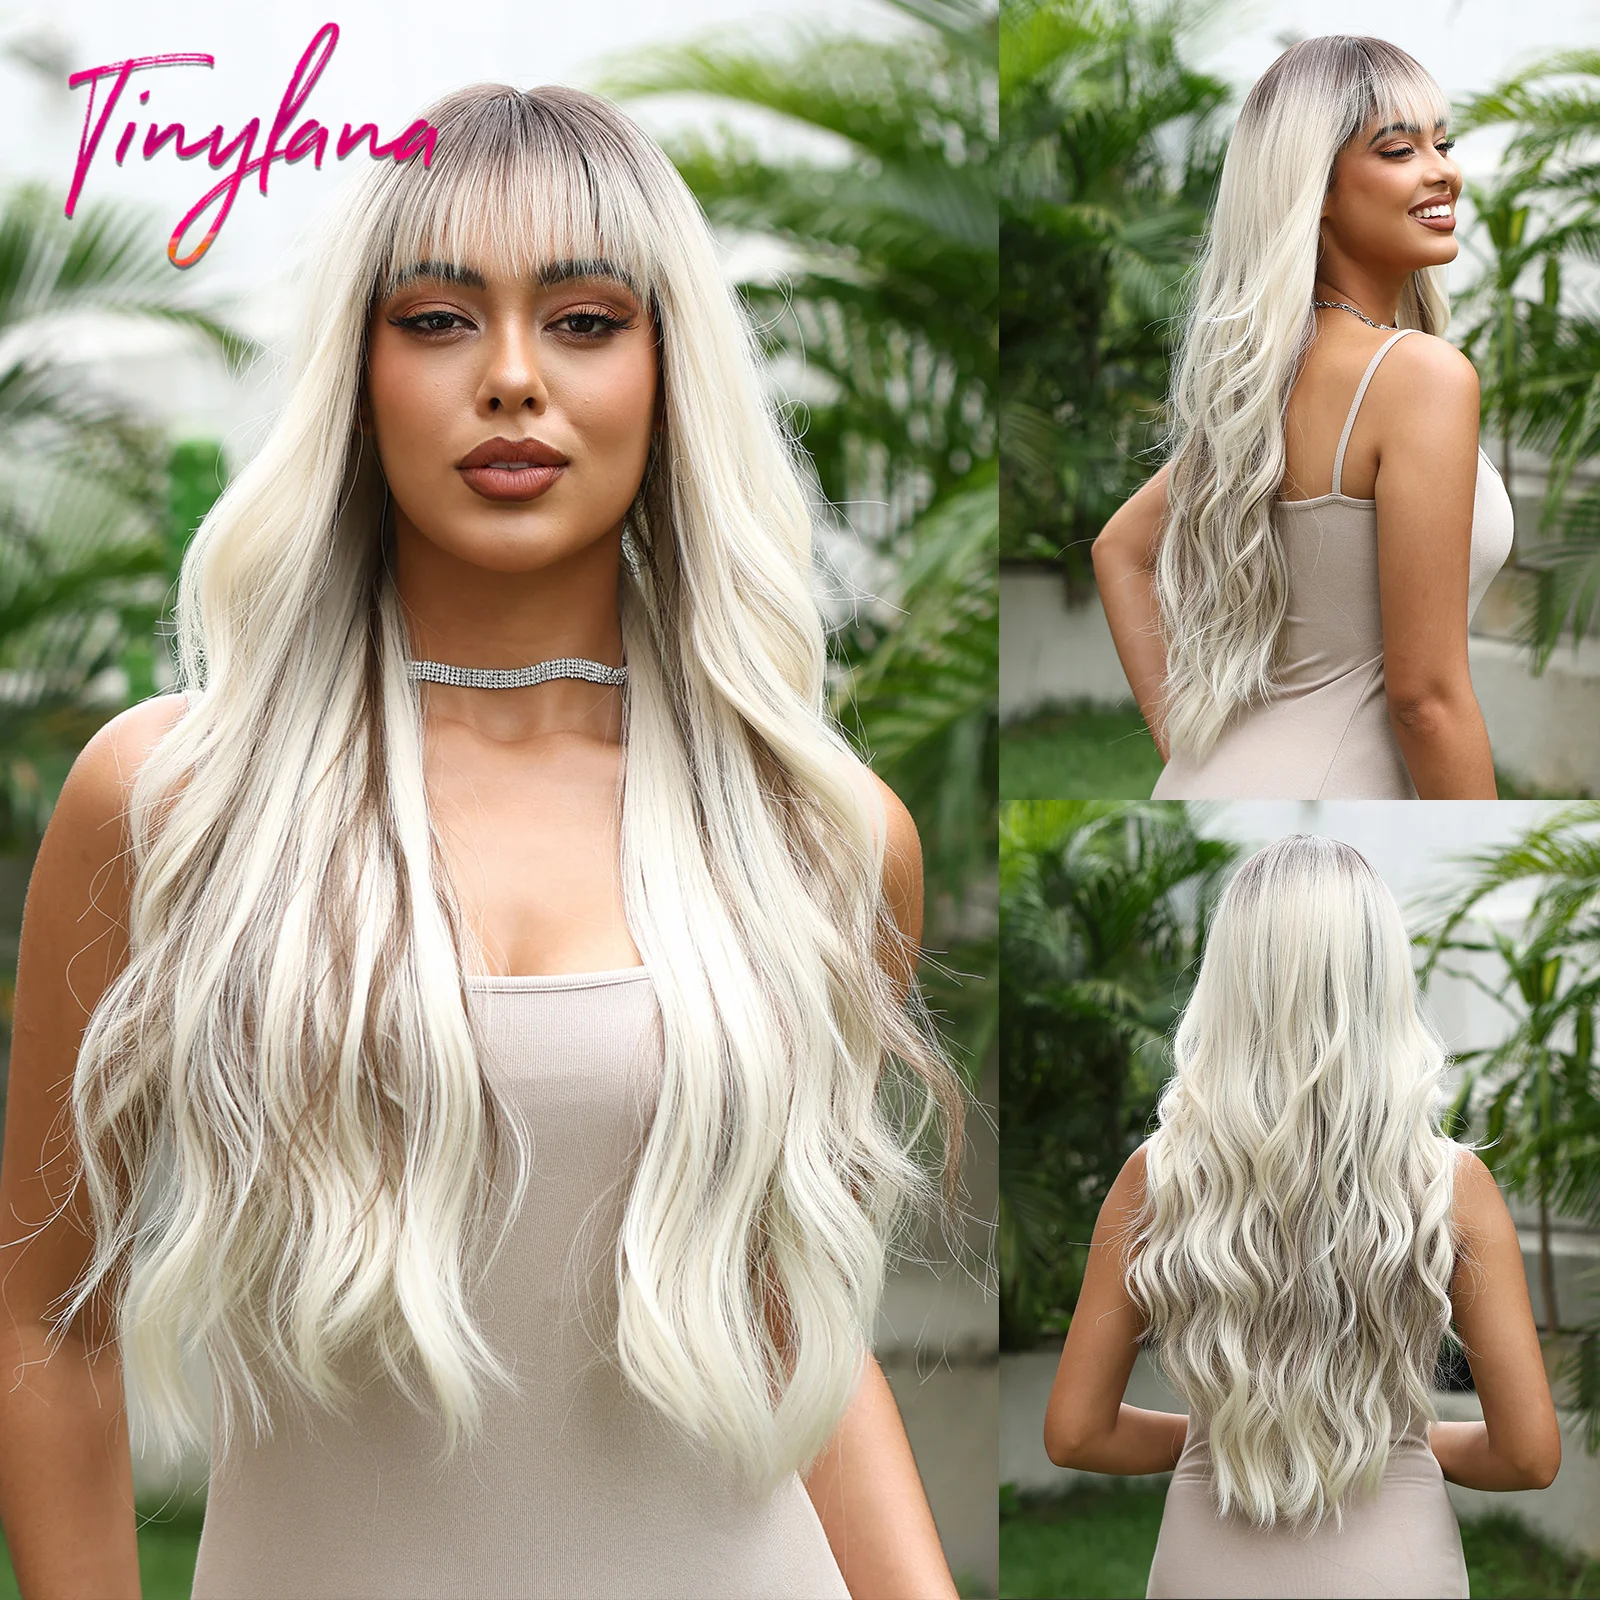 

Gray Brown Ombre Platinum Wigs with Bangs Long Curly Wavy Blonde Natural Hair Wigs for Women Afro Cosplay Heat Resistant Fiber